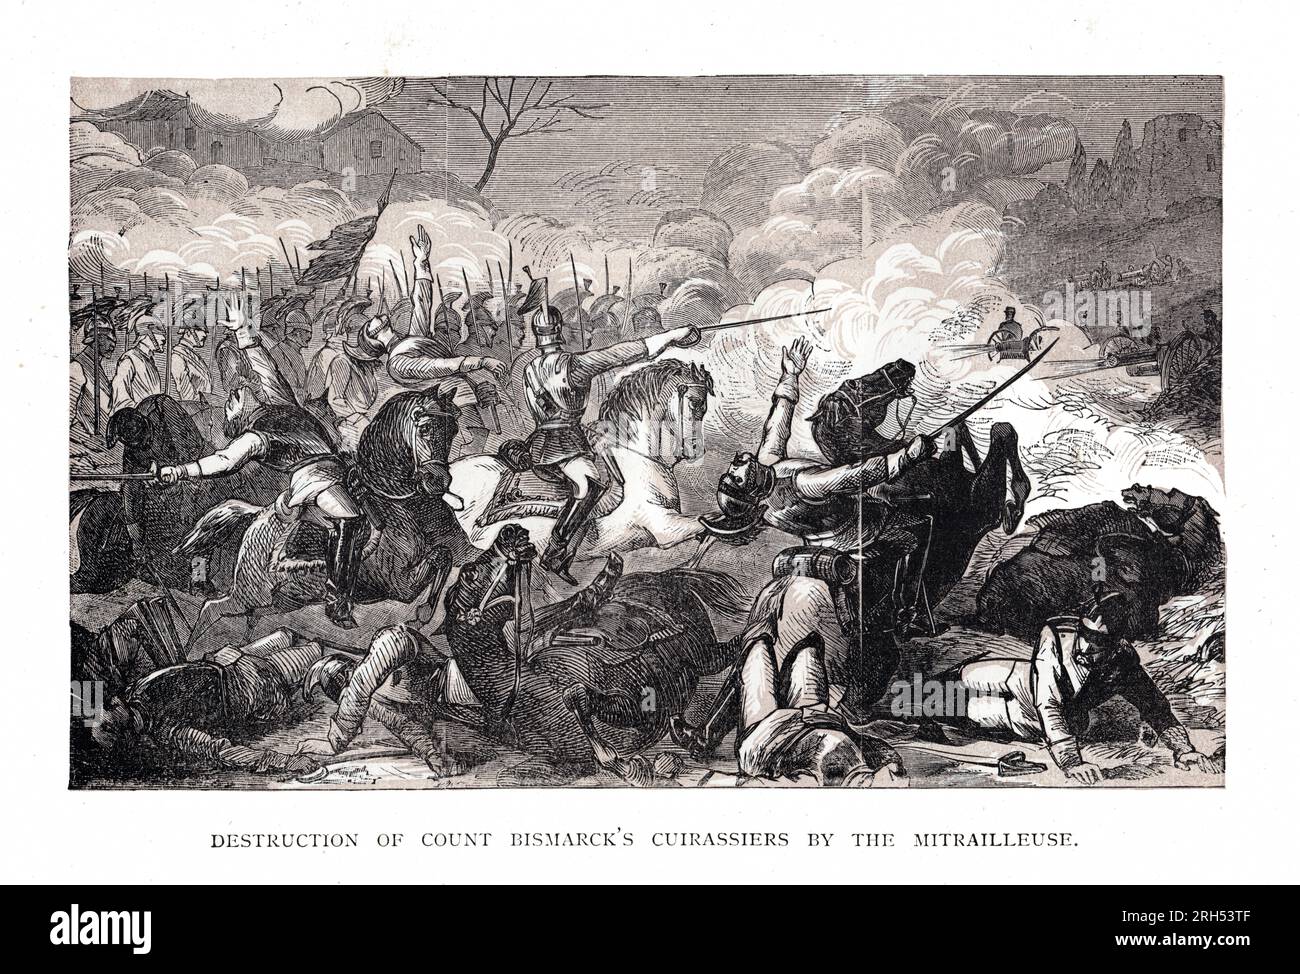 Destruction Of Bismarck's Cuirassiers by the Mitrailleuse Illustration from The History of France by Thomas Wright (London Printing & Publishing) Stock Photo